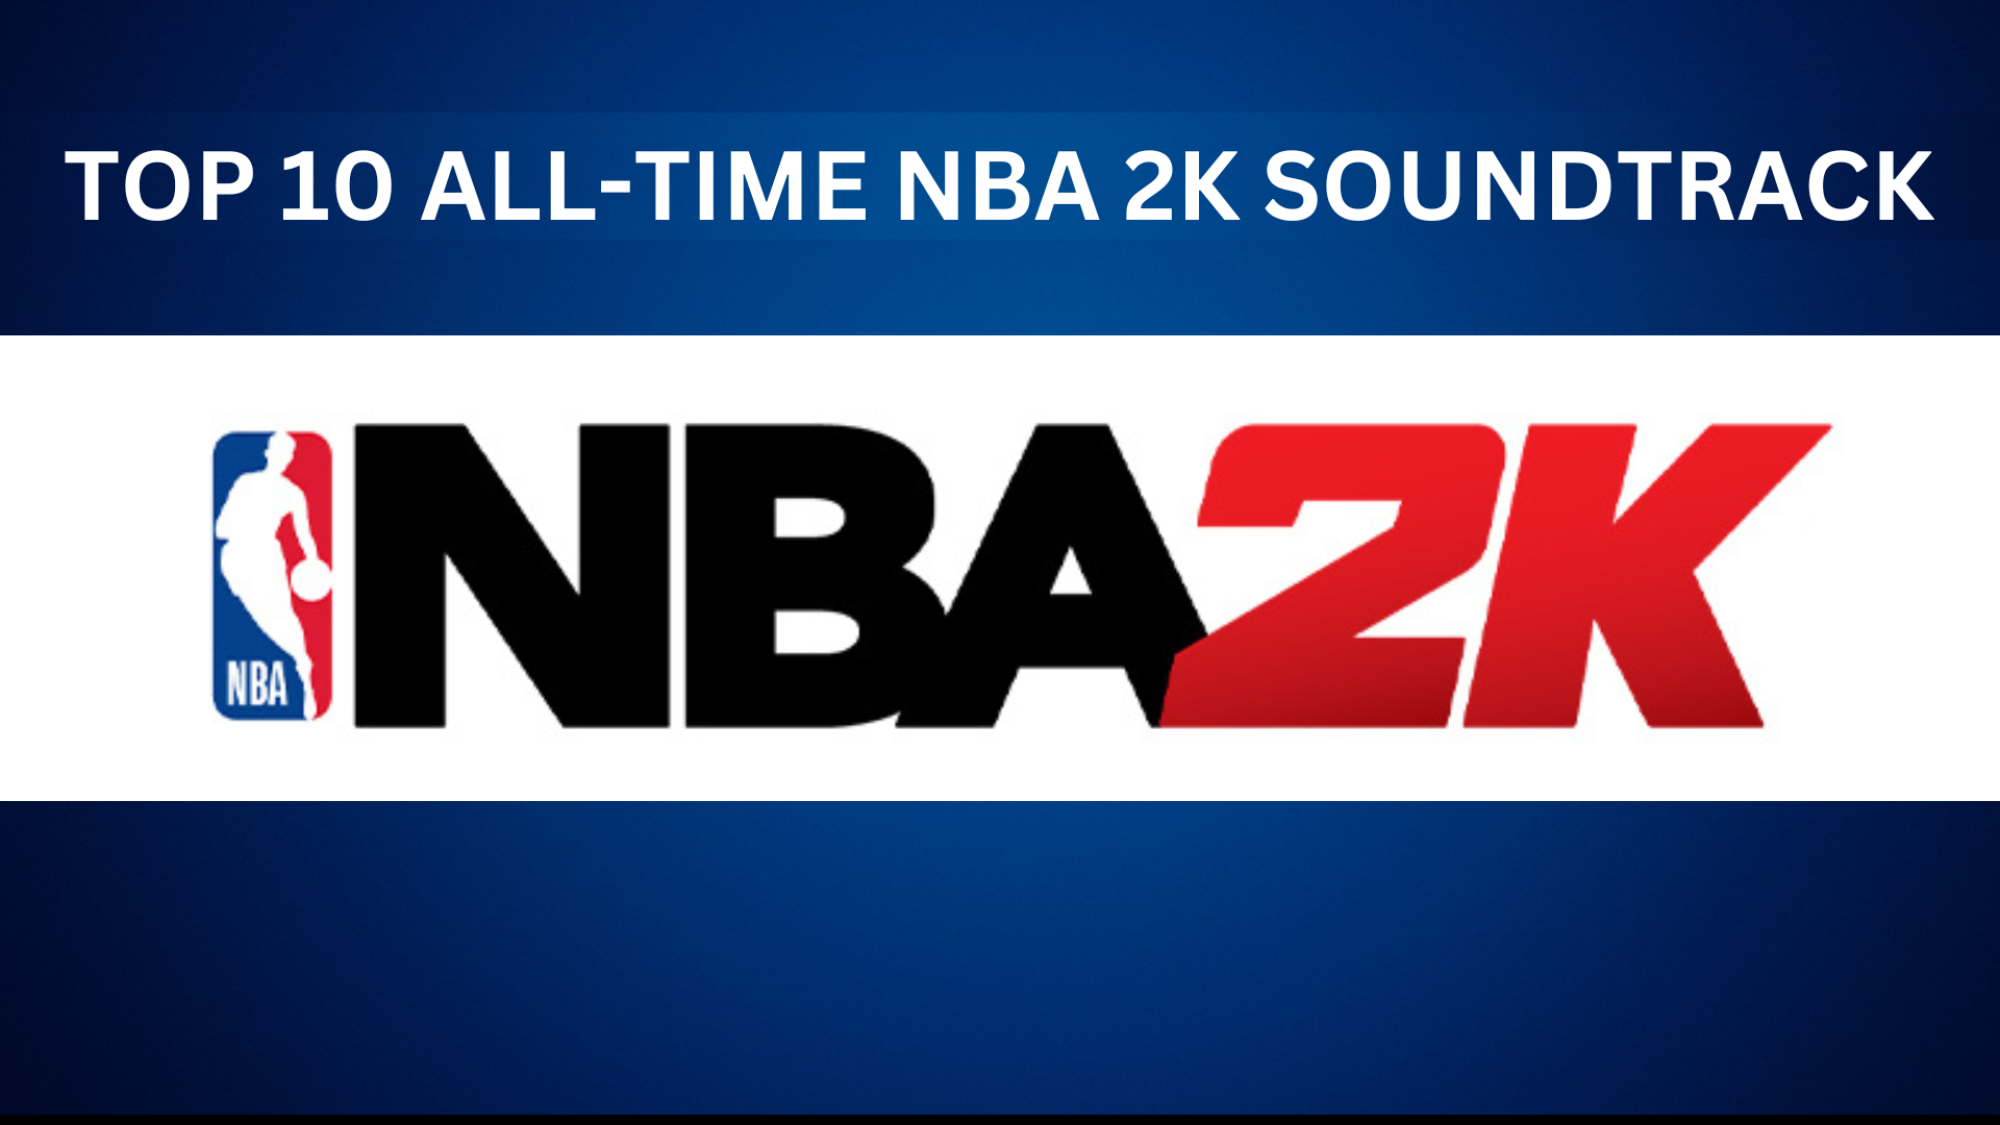 Top 10 All-Time NBA 2K Soundtrack credit by Lysious/AURN